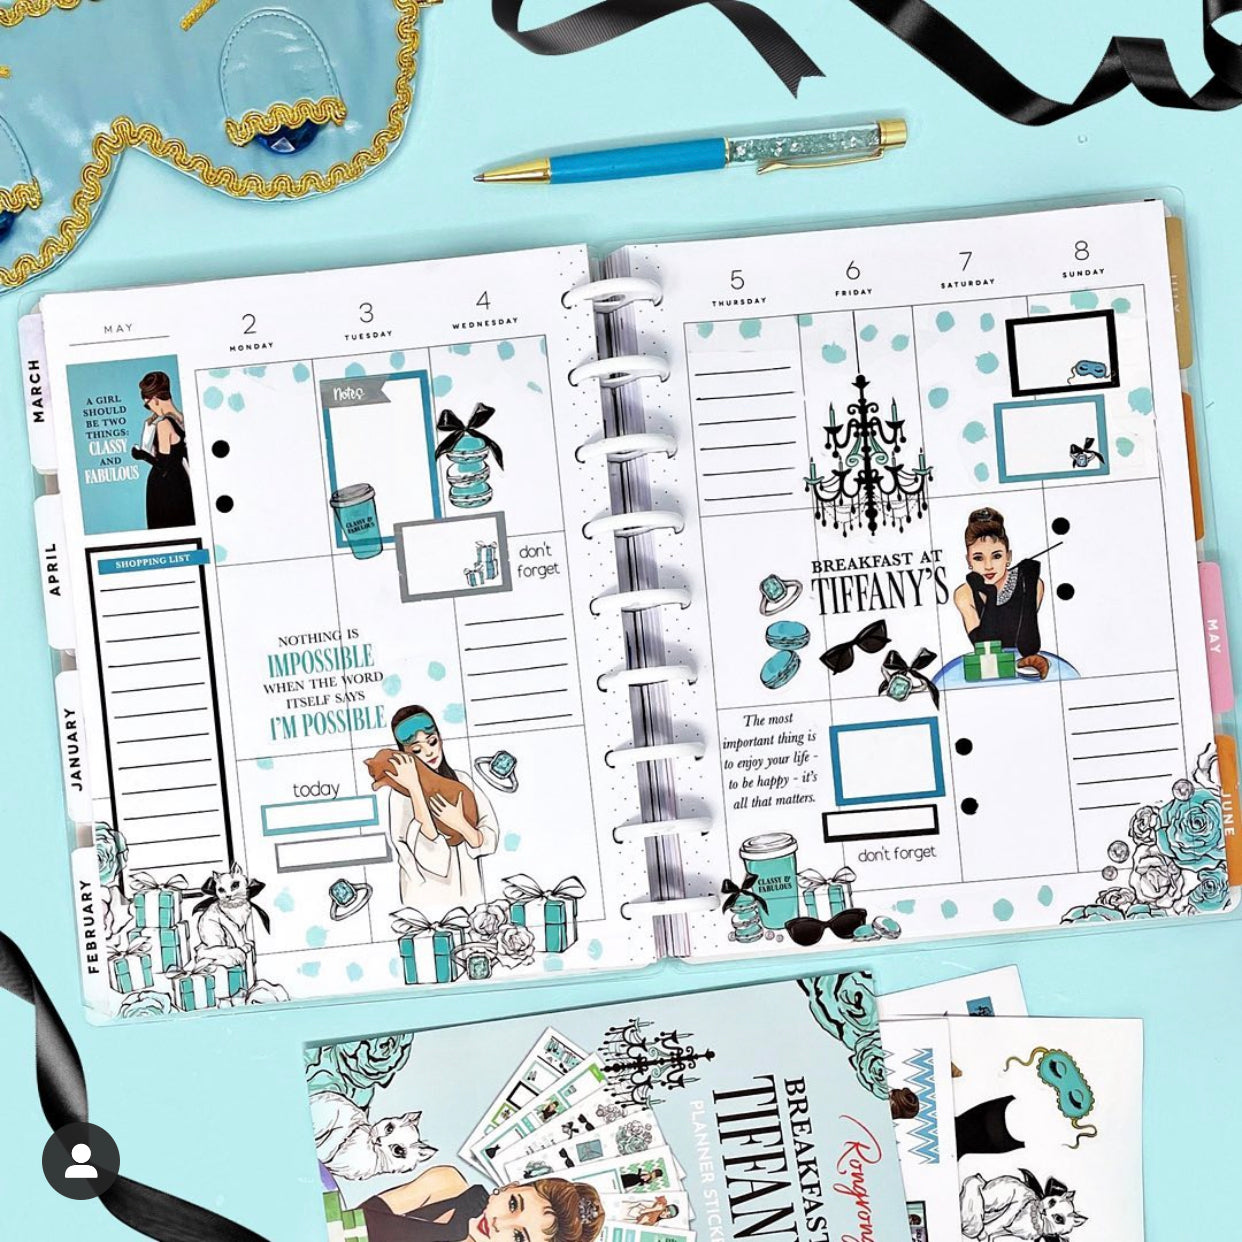 The Rongrong Sticker Pack Breakfast at Tiffany's Theme for Planners, Calendars, Journals and Projects – Premium Quality Hand Drawn Full of Glitz